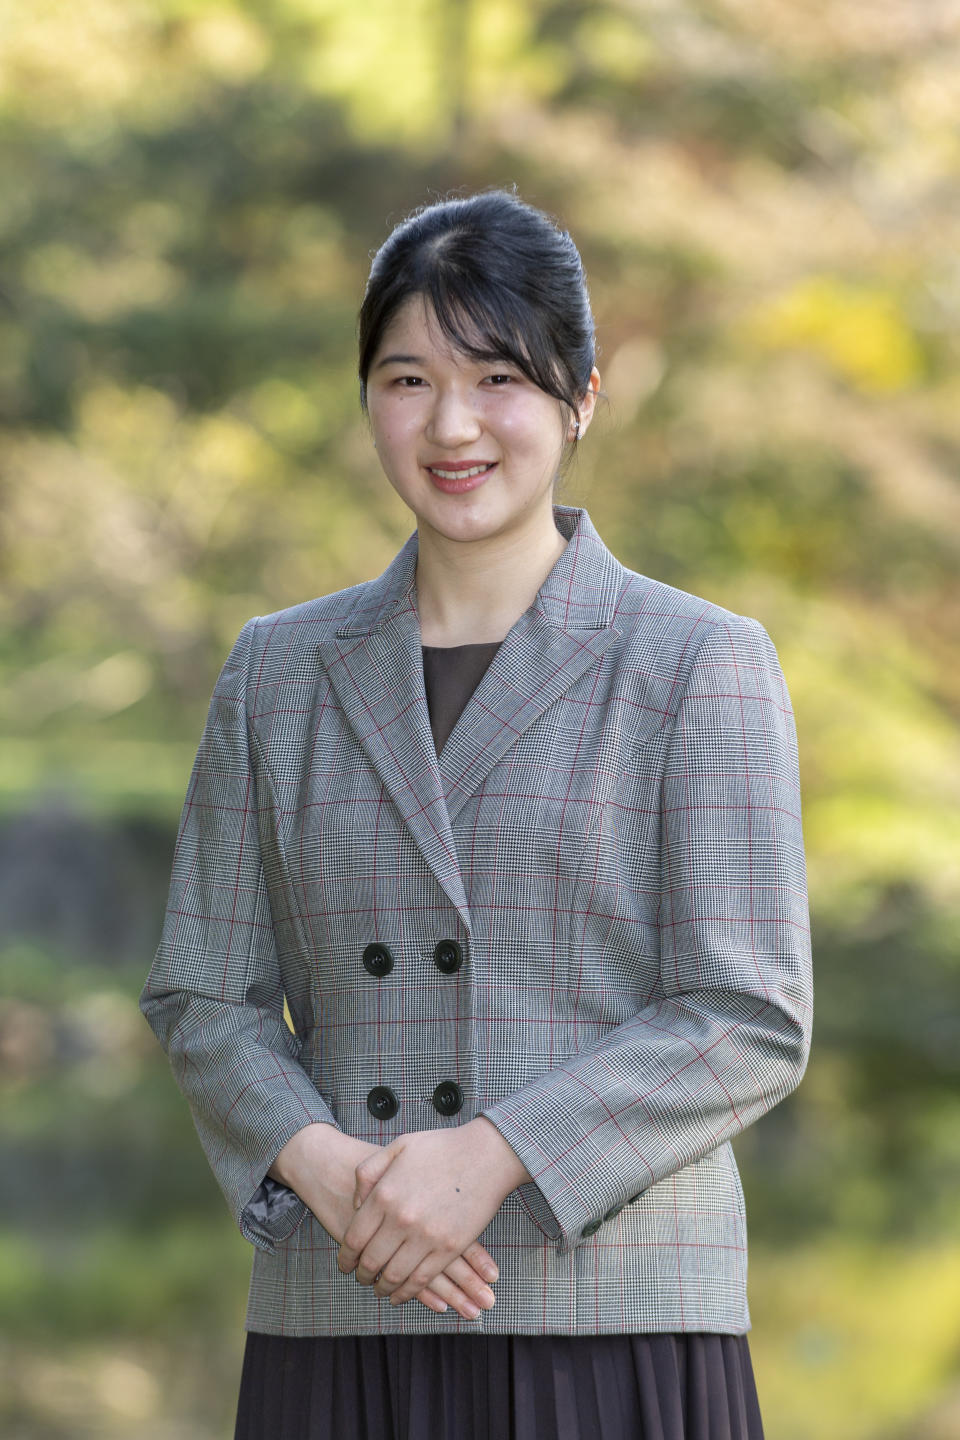 In this photo provided by the Imperial Household Agency of Japan, Princess Aiko, daughter of Emperor Naruhito and Empress Masako, strolls in the garden of the Imperial Residence at the Imperial Palace in Tokyo on Nov. 14, 2021, ahead of her 20th birthday on Dec. 1, 2021. (The Imperial Household Agency of Japan via AP)